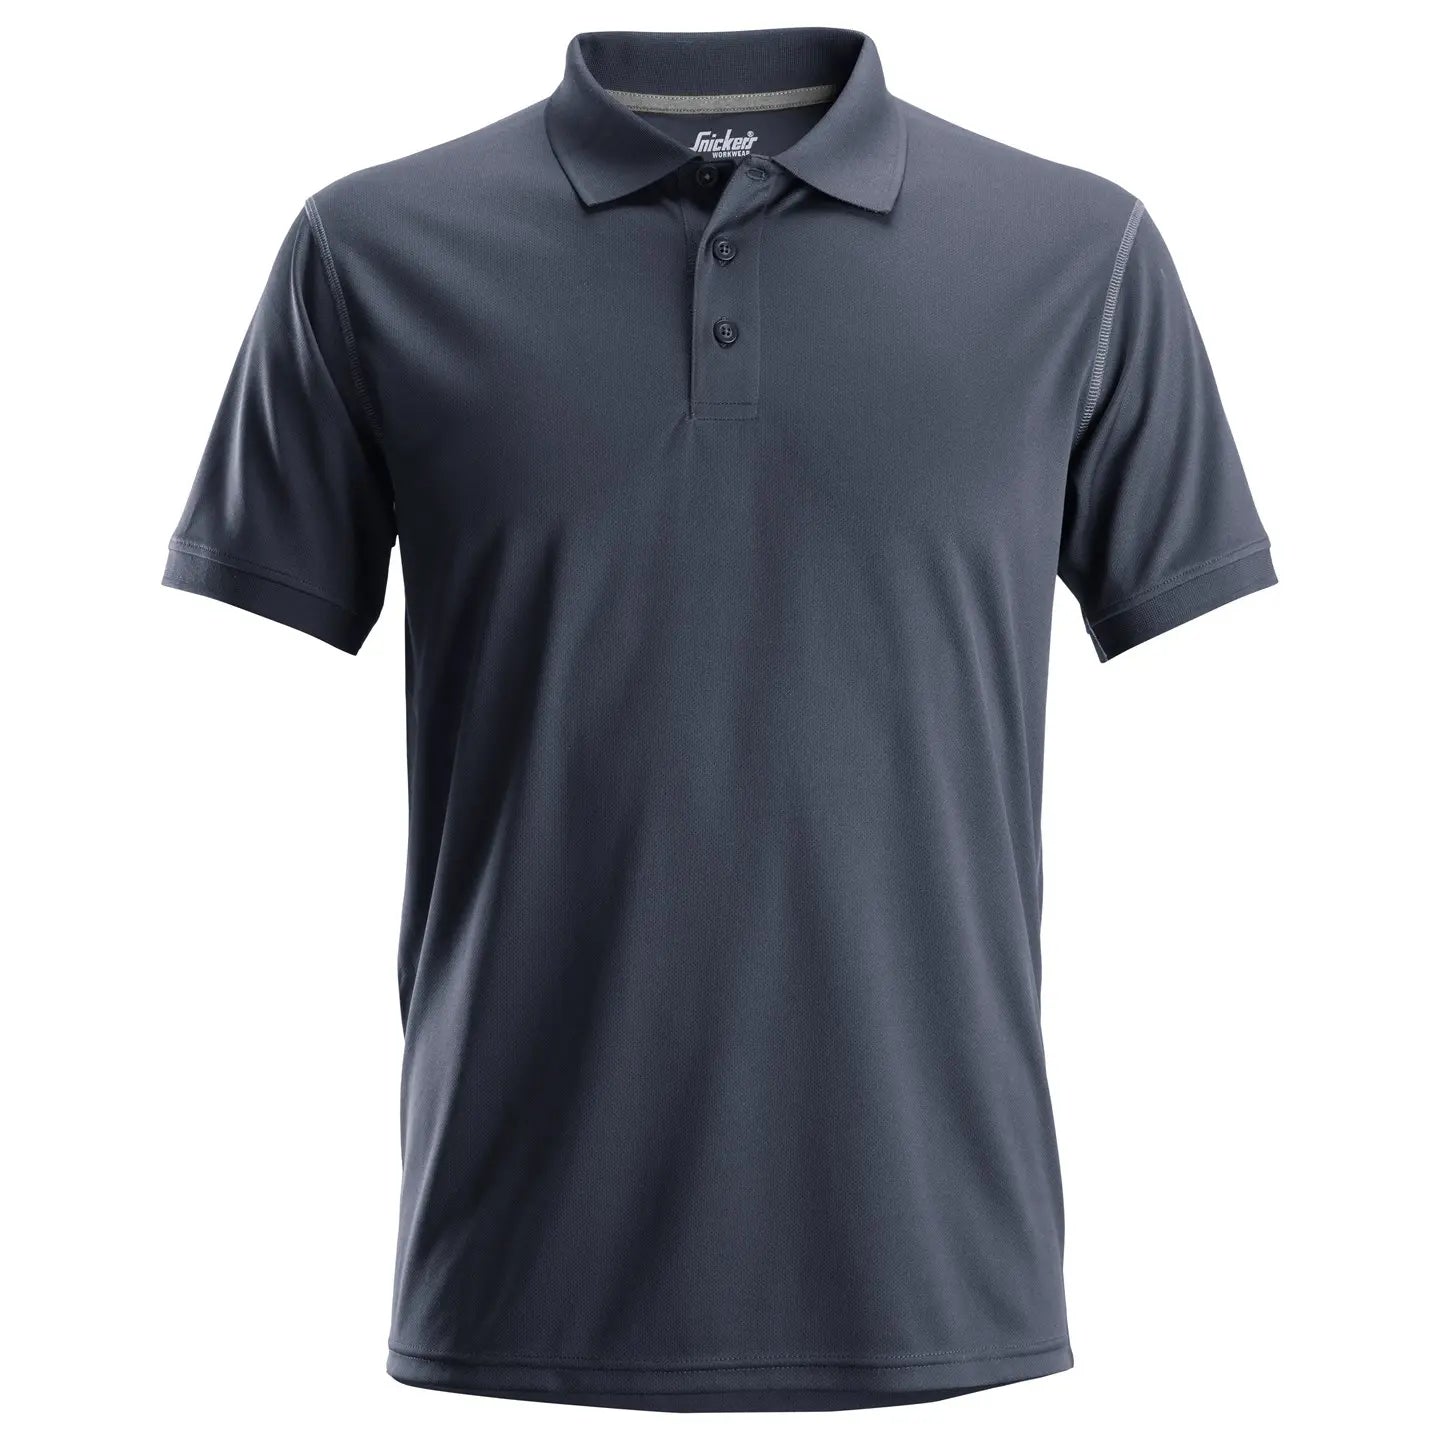 SNICKERS 2721 ALLROUNDWORK POLO SHIRT